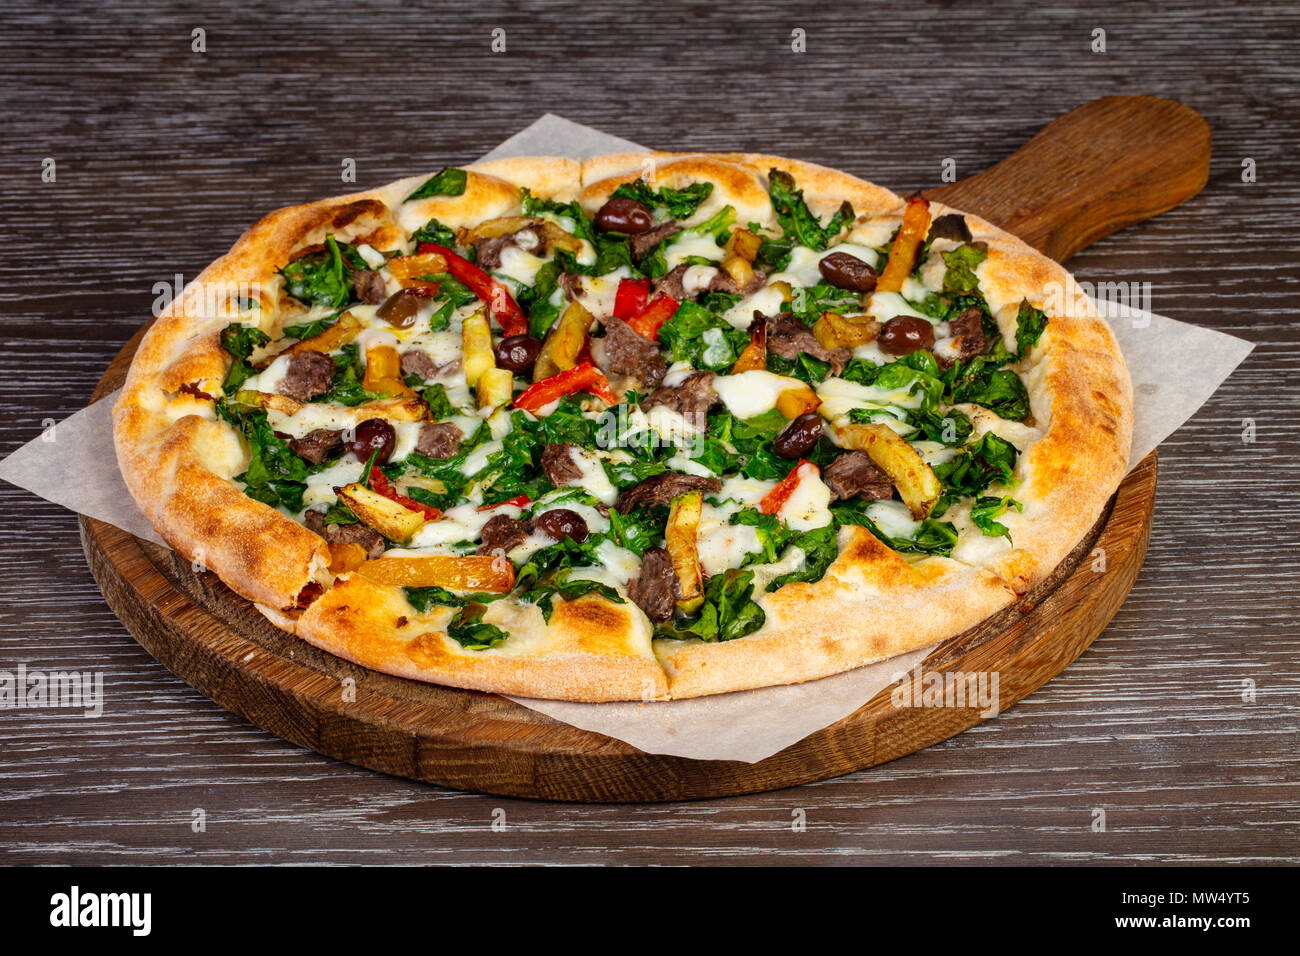 Delicious vegetarien 'Spinach' pizza with olives Stock Photo